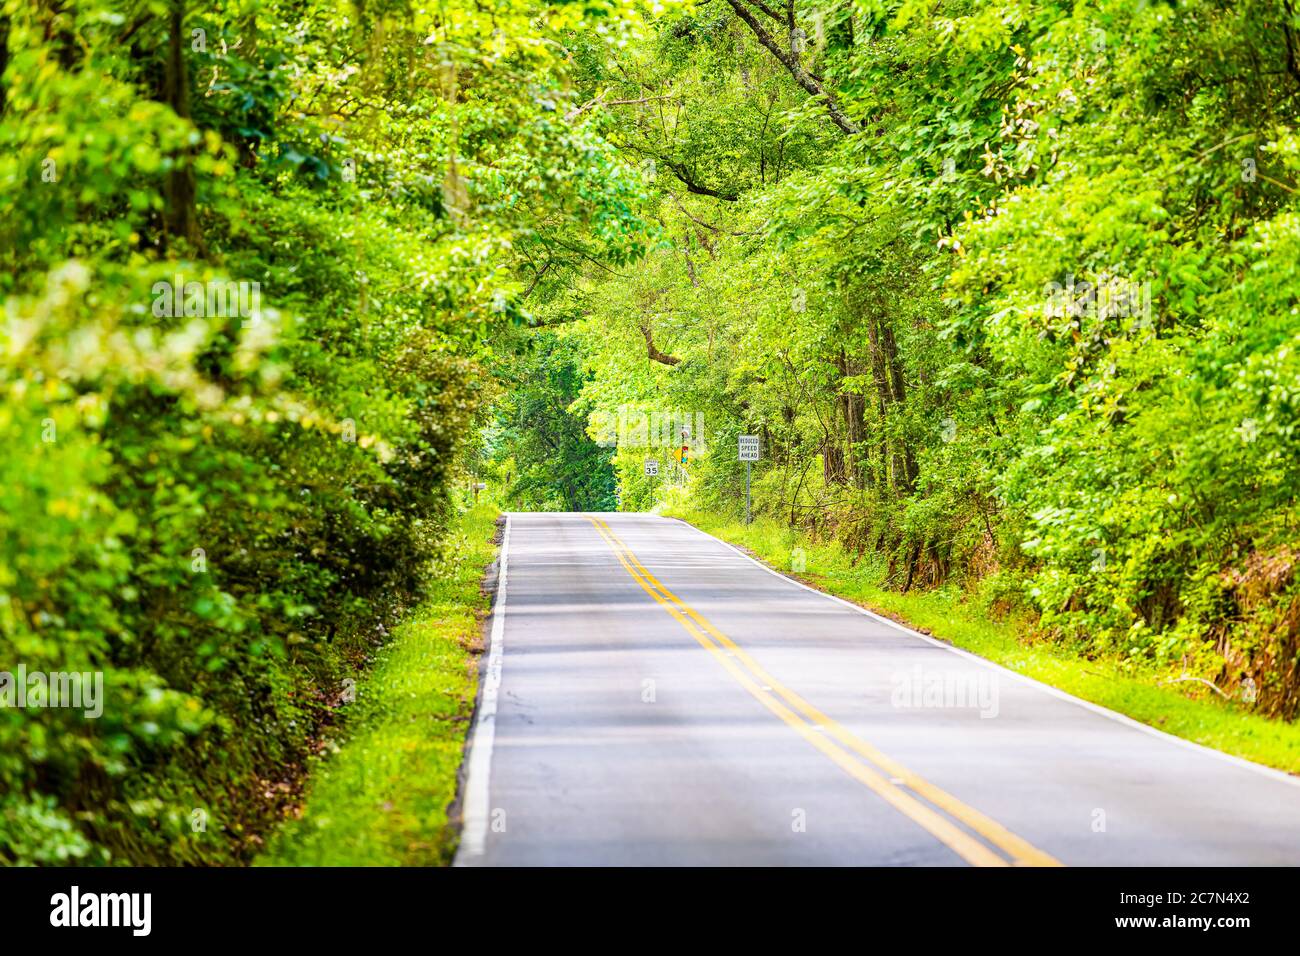 Tallahassee, USA Miccosukee street scenic canopy road with nobody in Florida during day with southern live oak trees Stock Photo